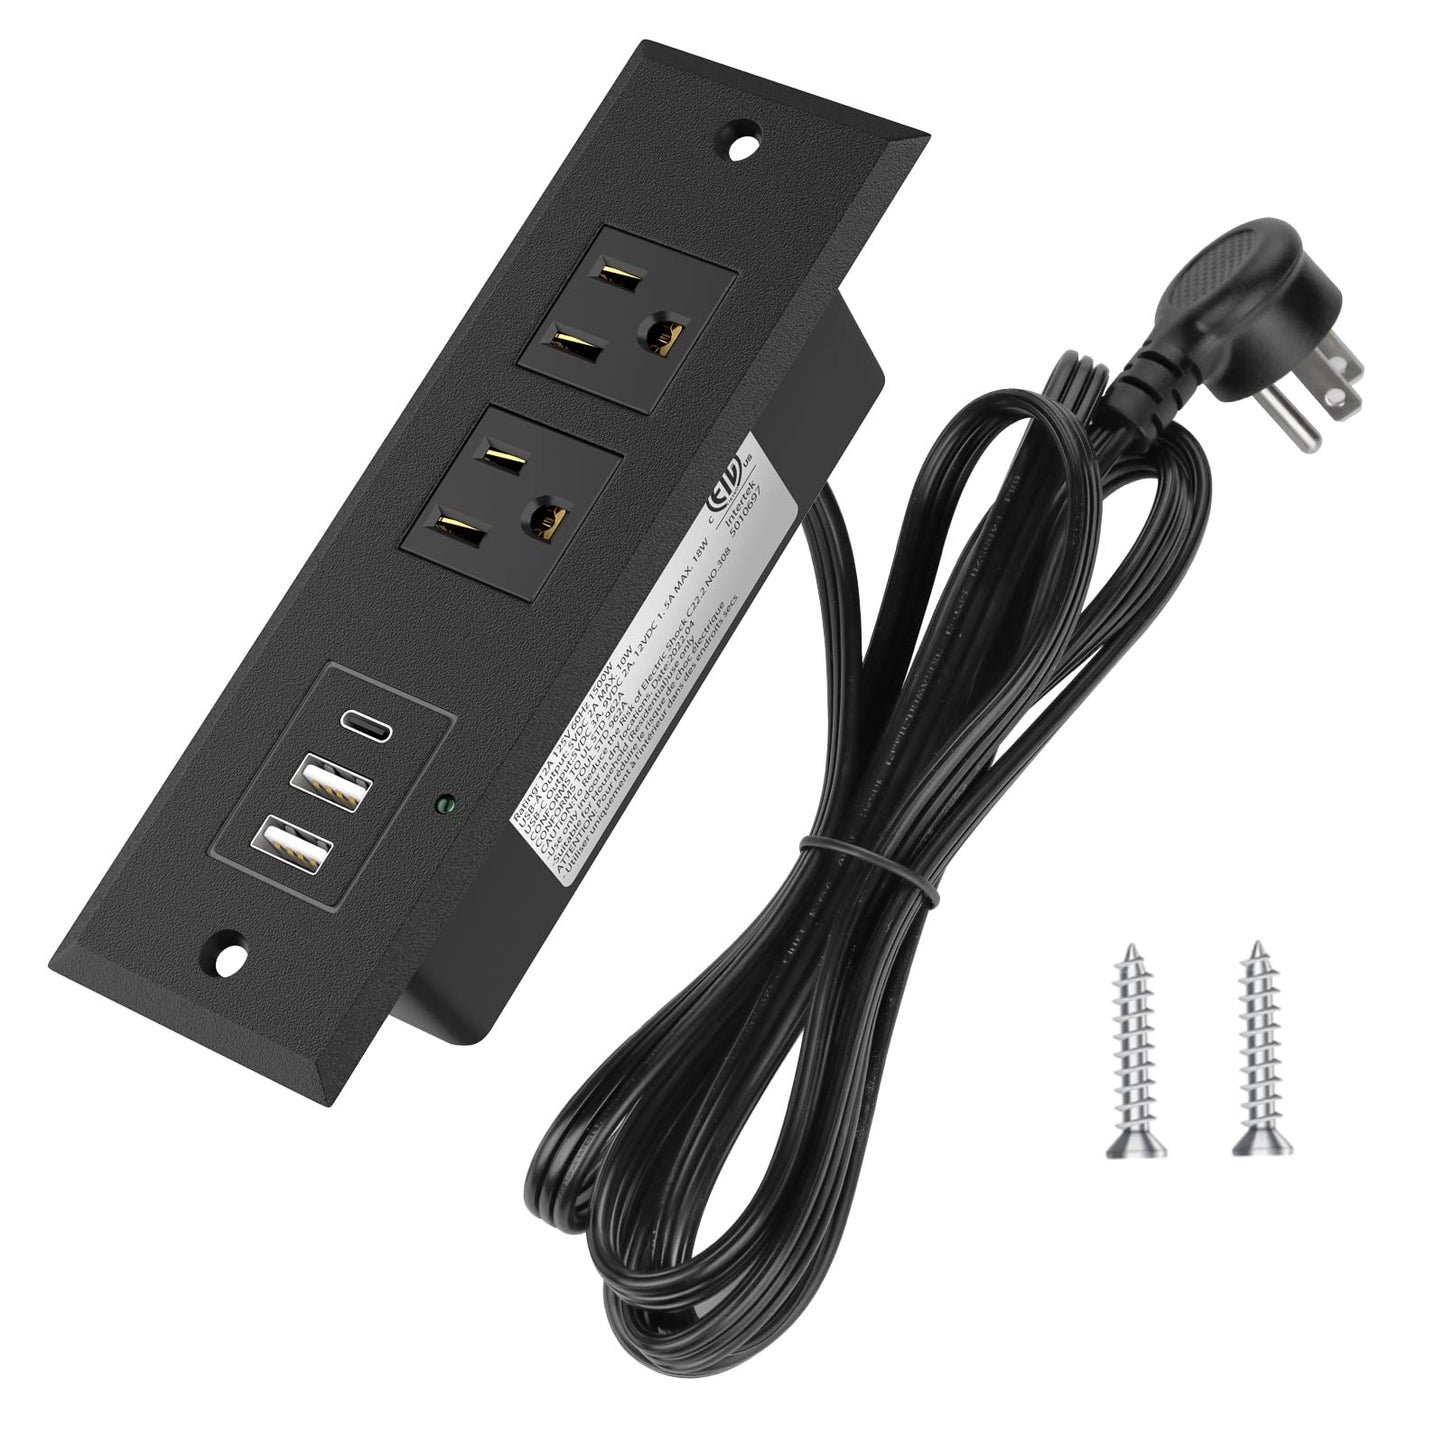 Recessed Power Strip Desk Outlet with USB-C Ports